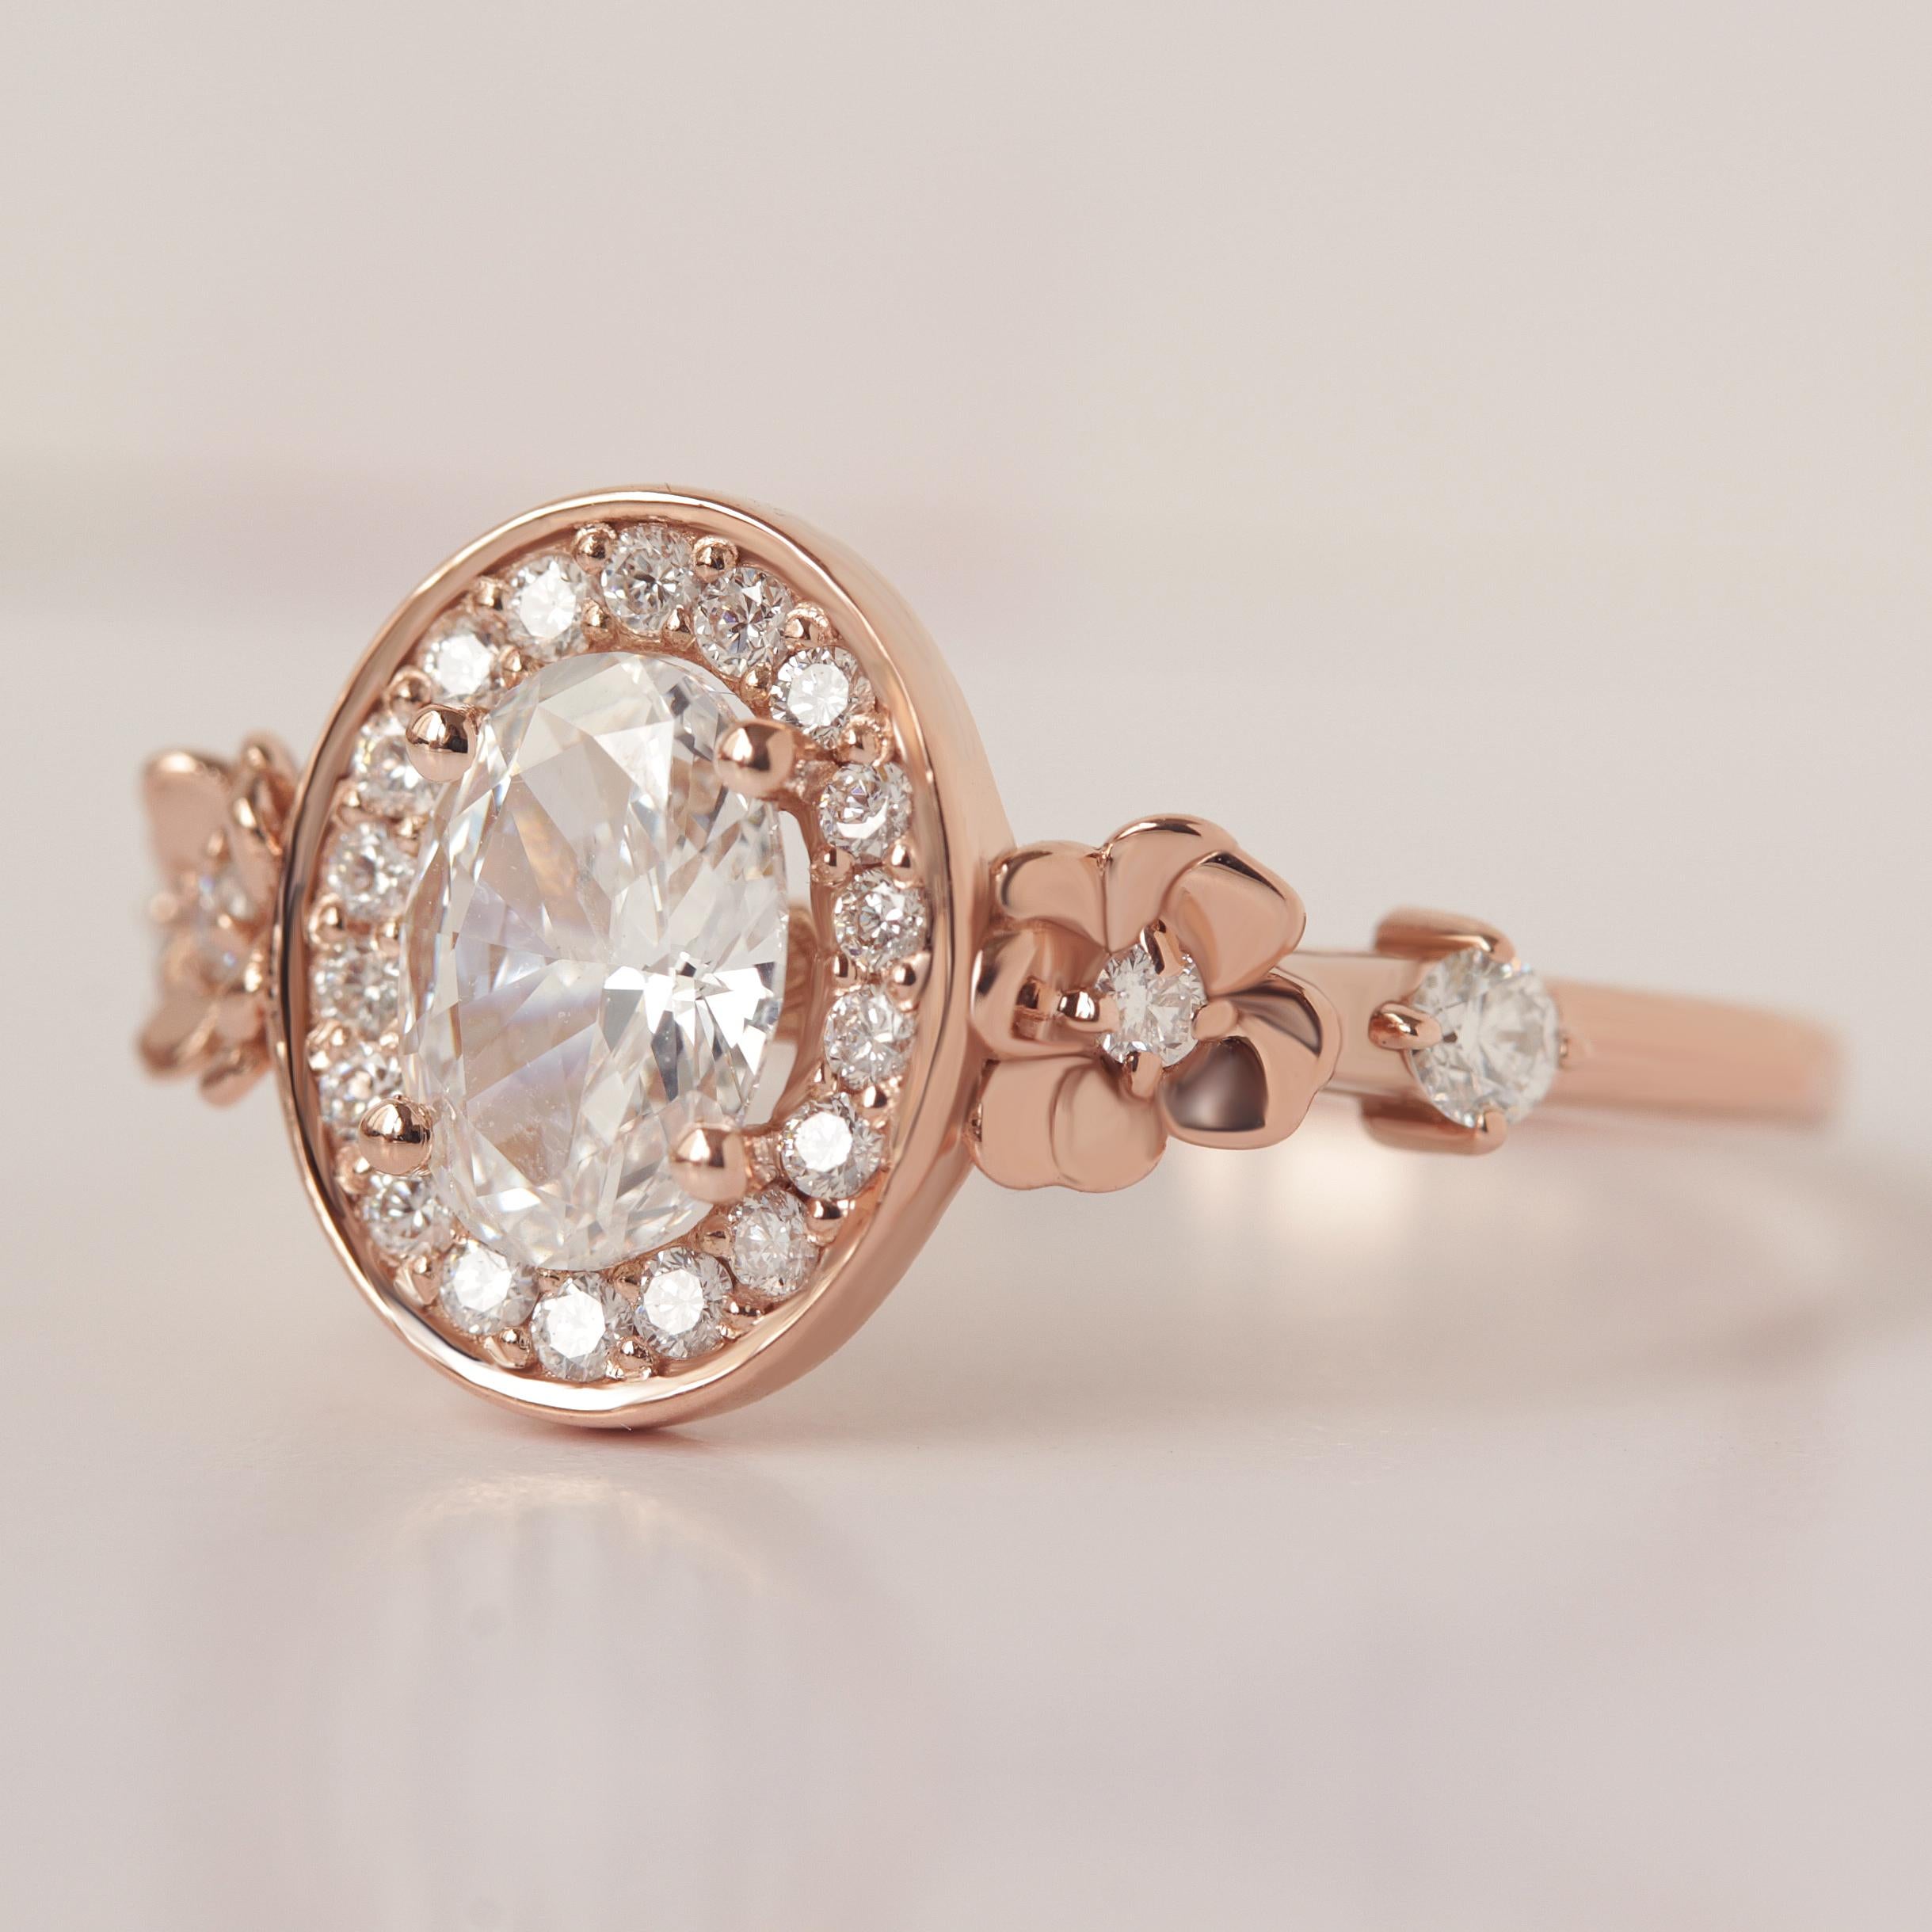 Art Deco Oval Halo Diamond Floral Engagement Ring - 